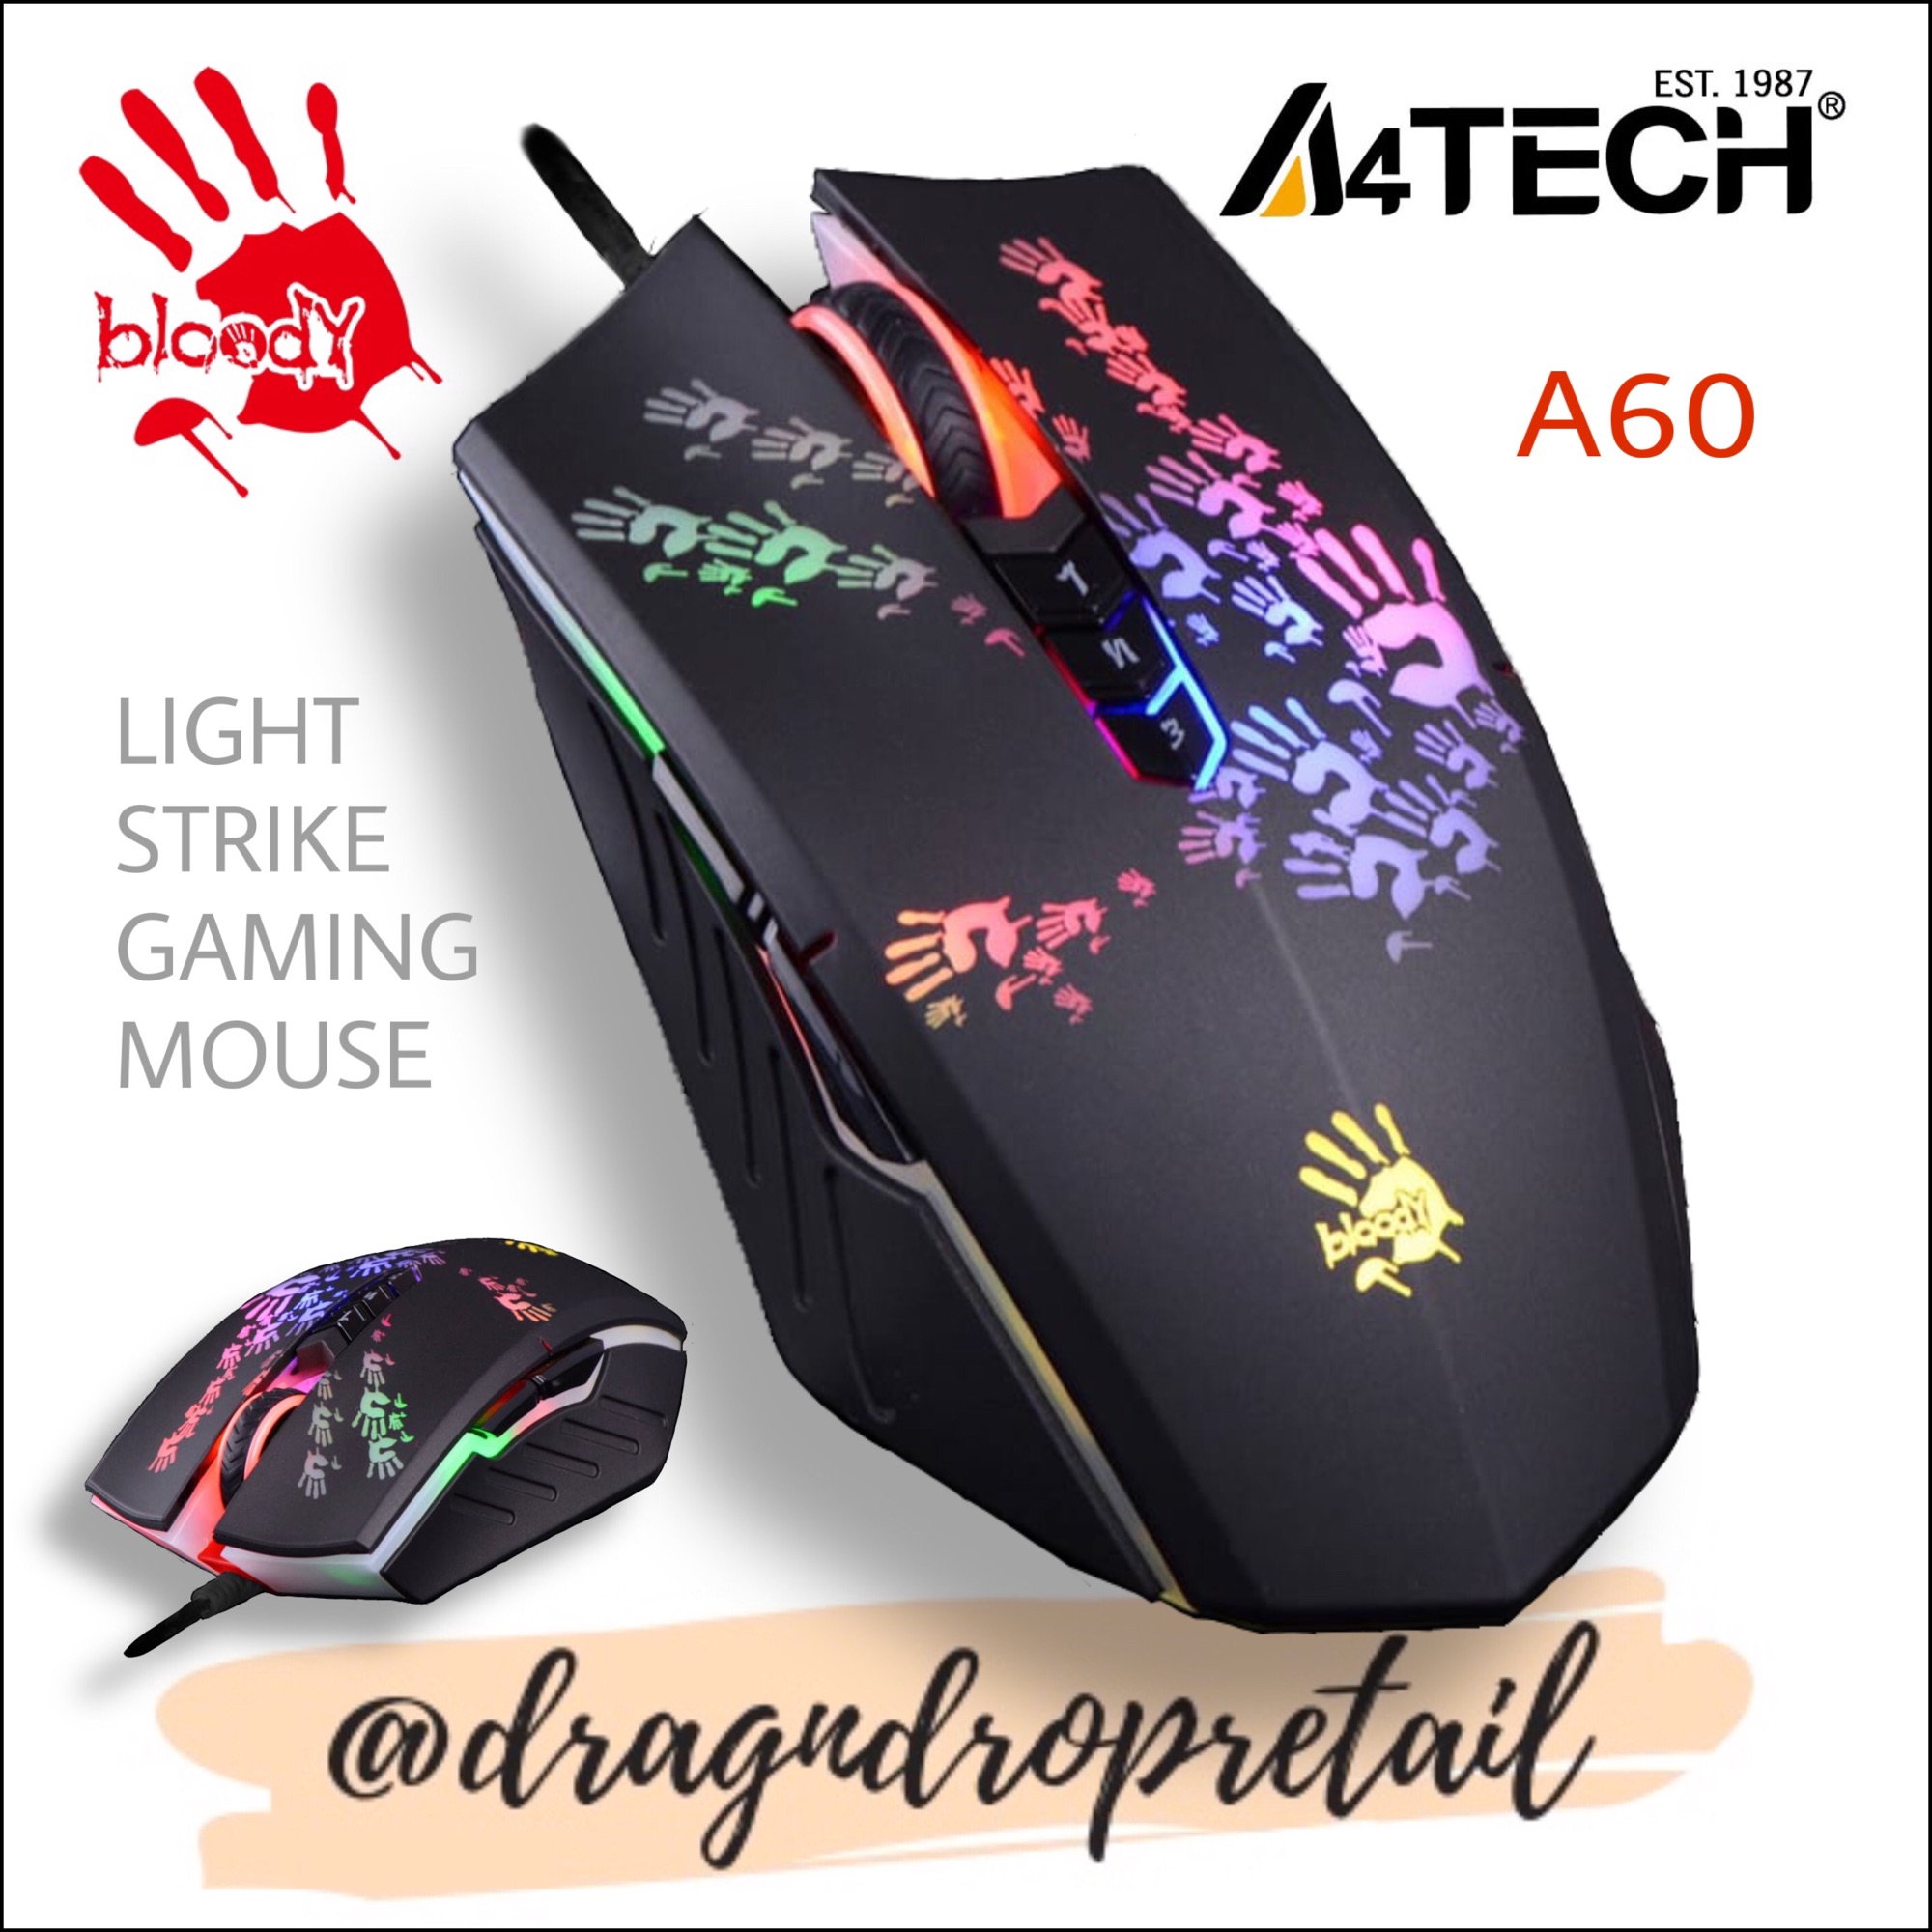 Blacklisted device bloody mouse. Bloody a60 Mouse. Mouse a4tech Bloody Gaming Light Strike a60 Metal x'Glide Pro Boots USB. Bloody a60 Drag click. Bloody a60 подходит для драг клика.